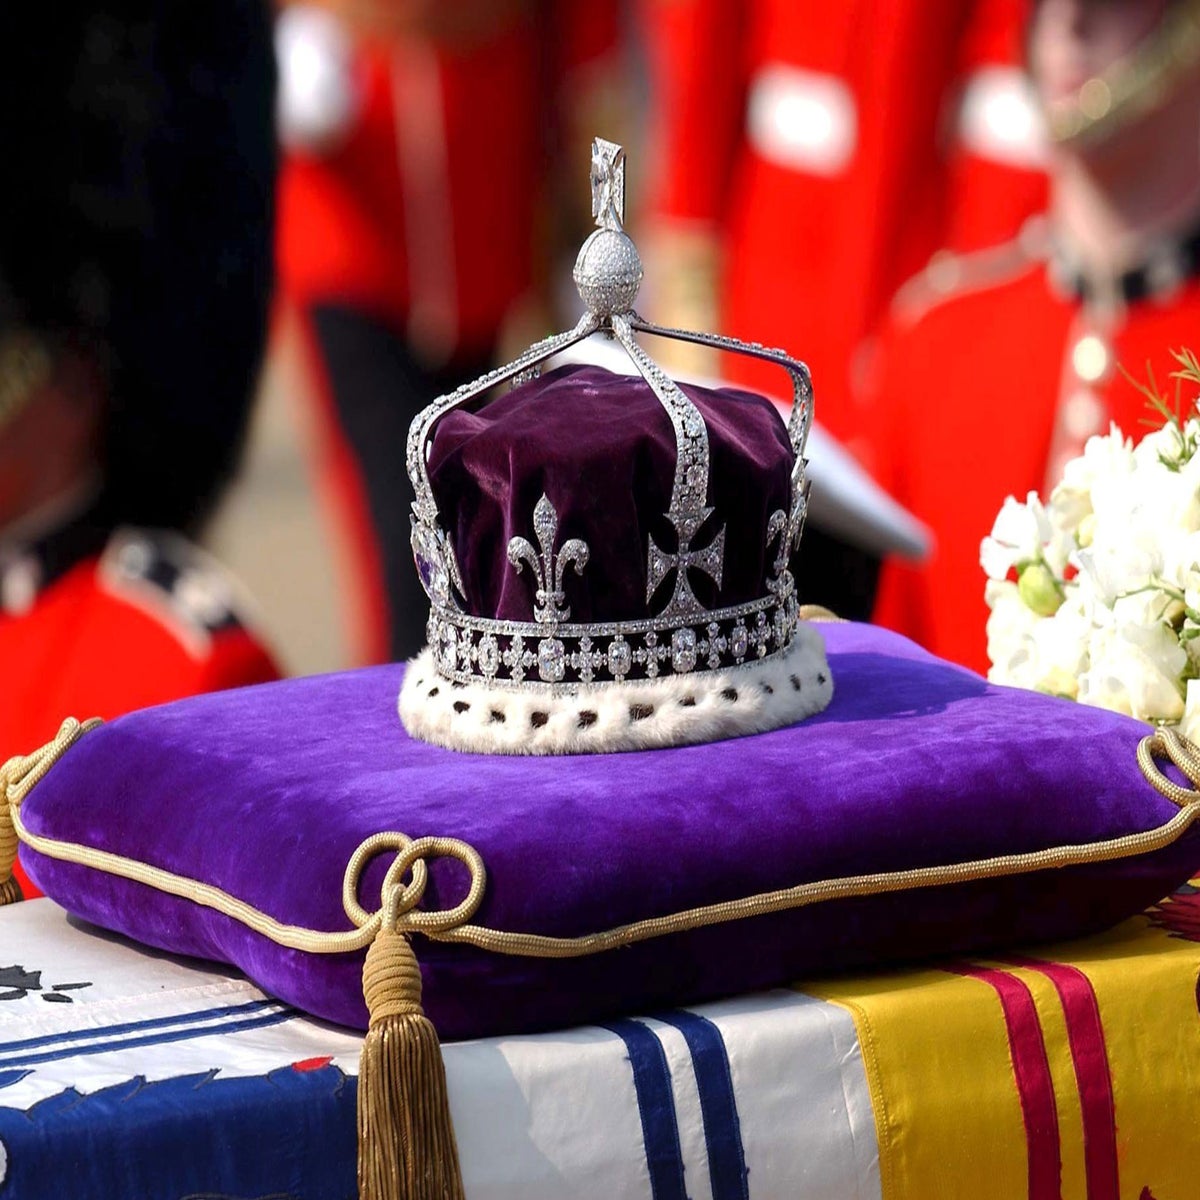 The Koh-i-Noor diamond is in Britain illegally. But it should still stay  there, Anita Anand